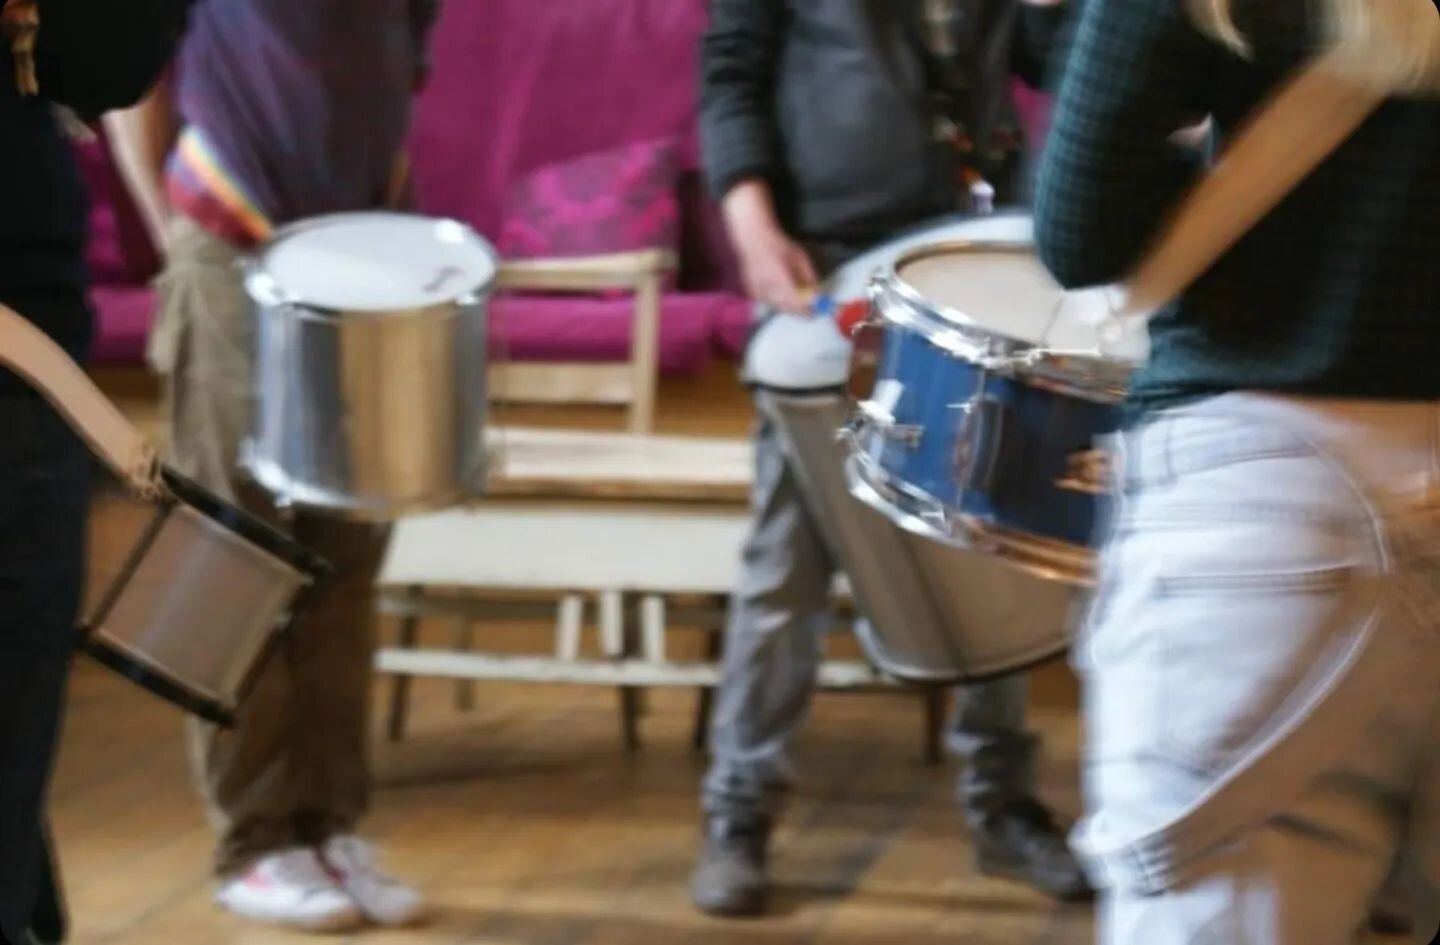 Join us this weekend for drumming lessons, in anticipation of our Hay Pride parade on Sunday 12th June

🥁🥁🥁🥁🥁🥁🥁🥁🥁🥁

For samba contact Fliss: 07425143038
For taiko get in touch with Heather: 07811628247

On 12th June the parade will leave th